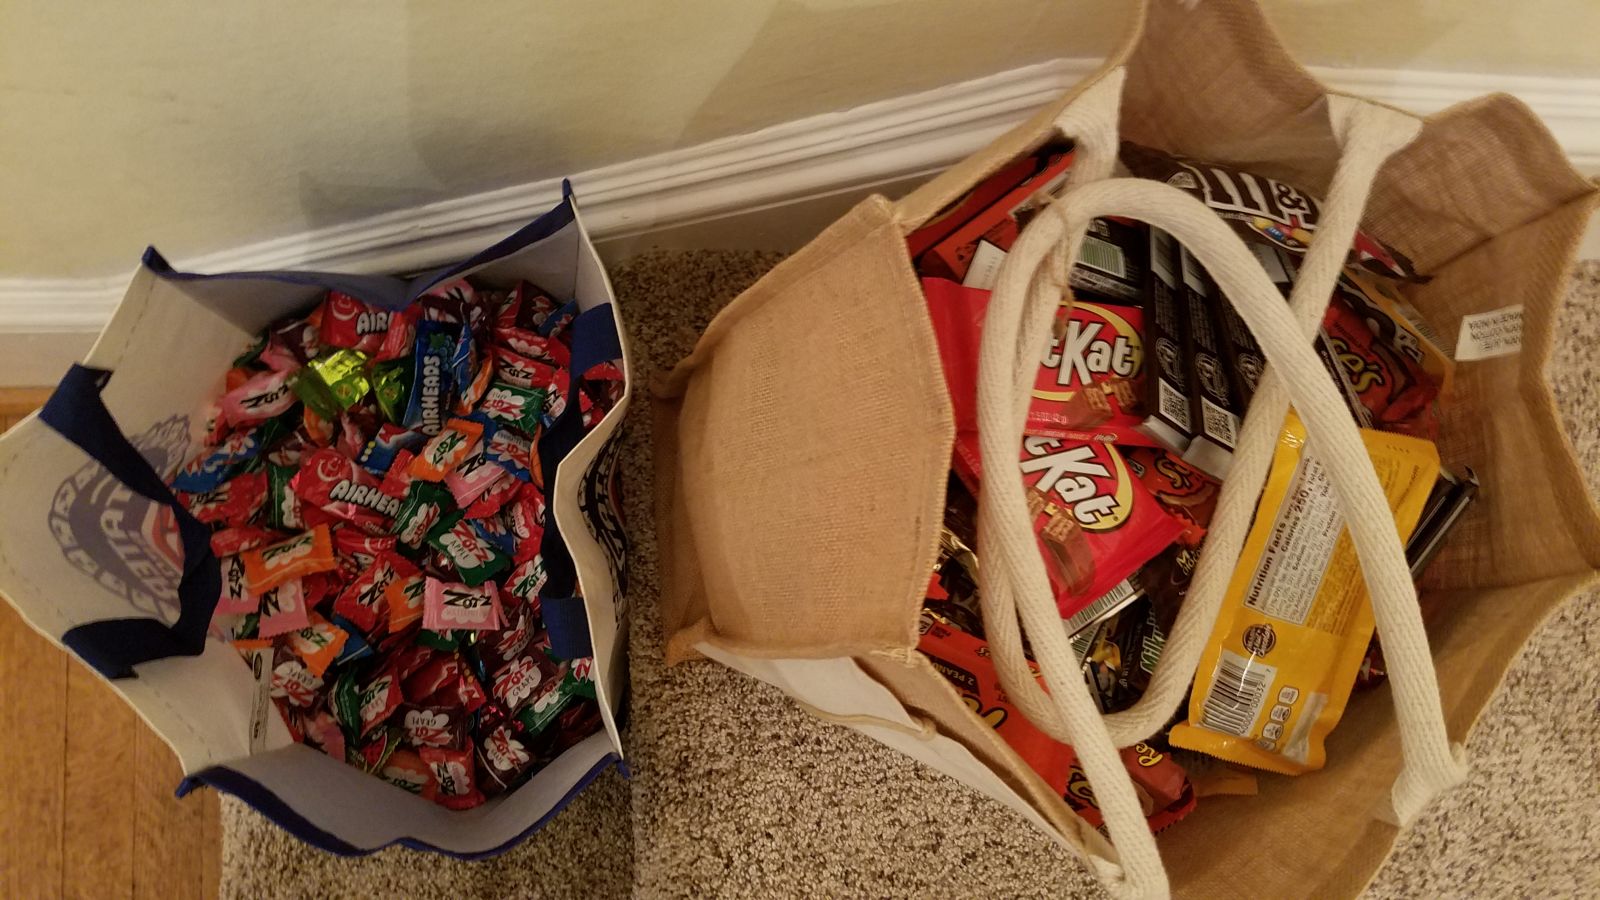 Illustration for article titled I got 23 pounds of candy. Bring it on, you tiny bastards. [Update] Im... out of candy.